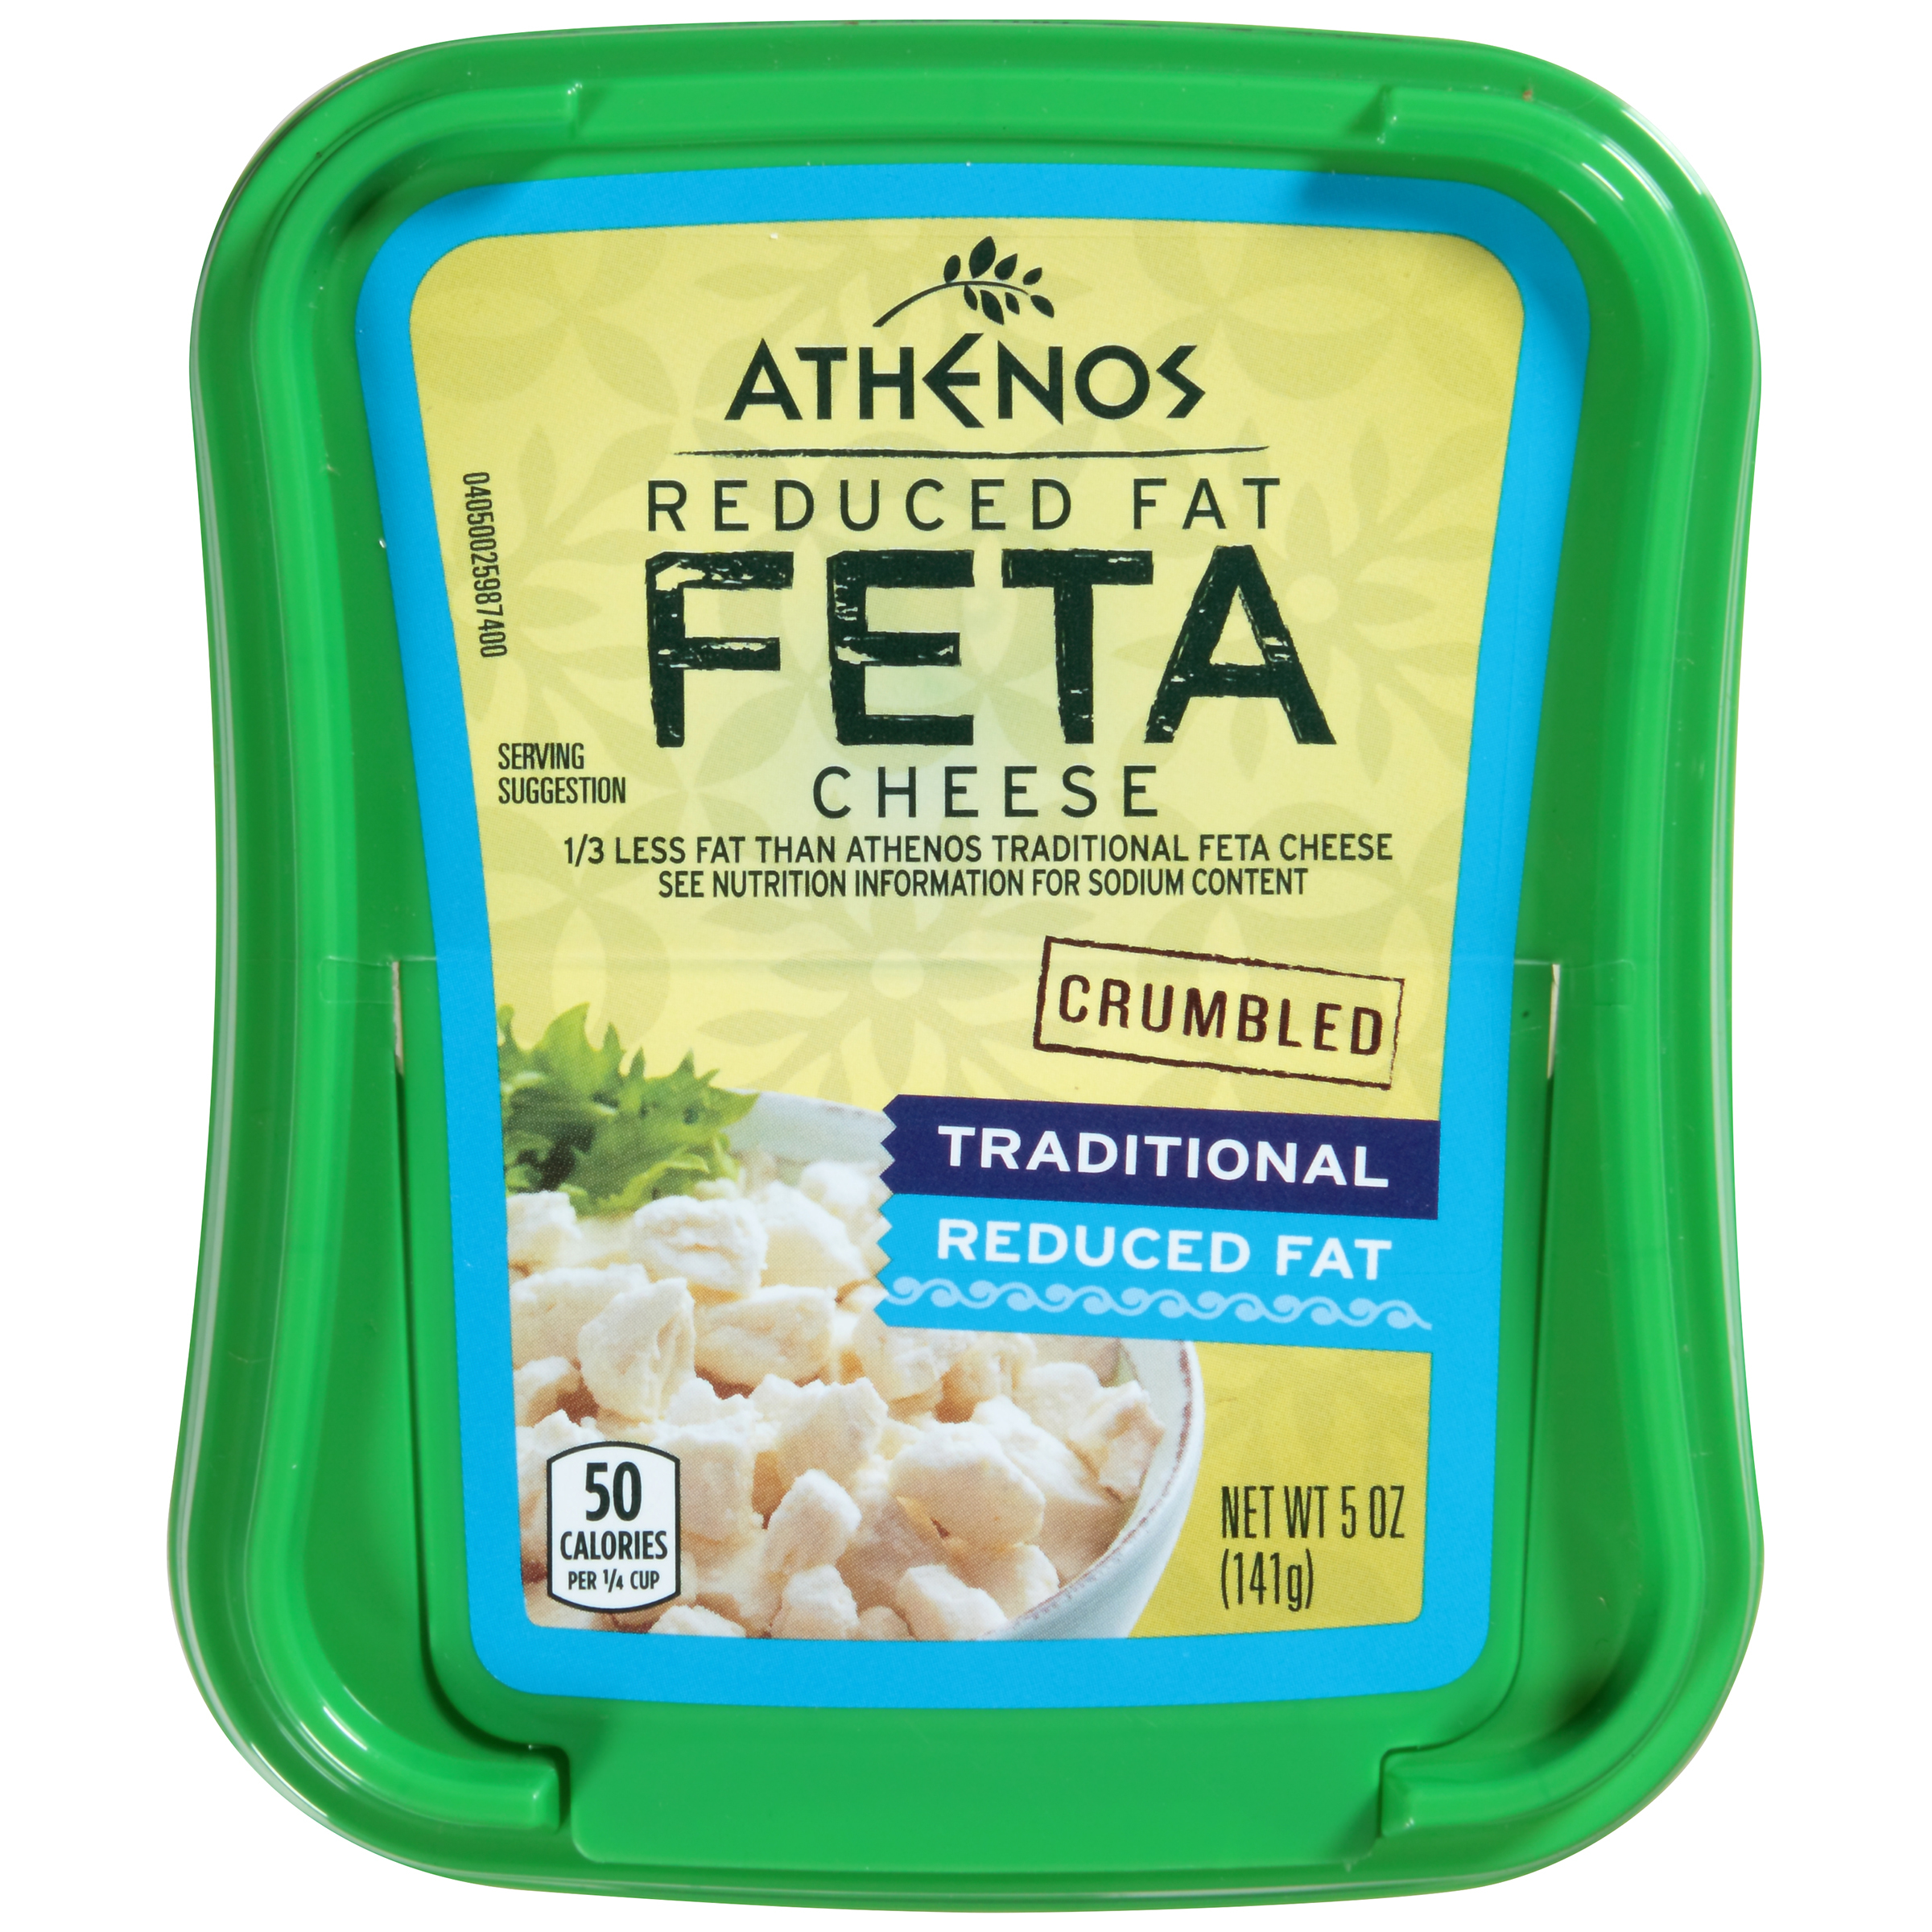 Athenos More Products - Reduced Fat Feta